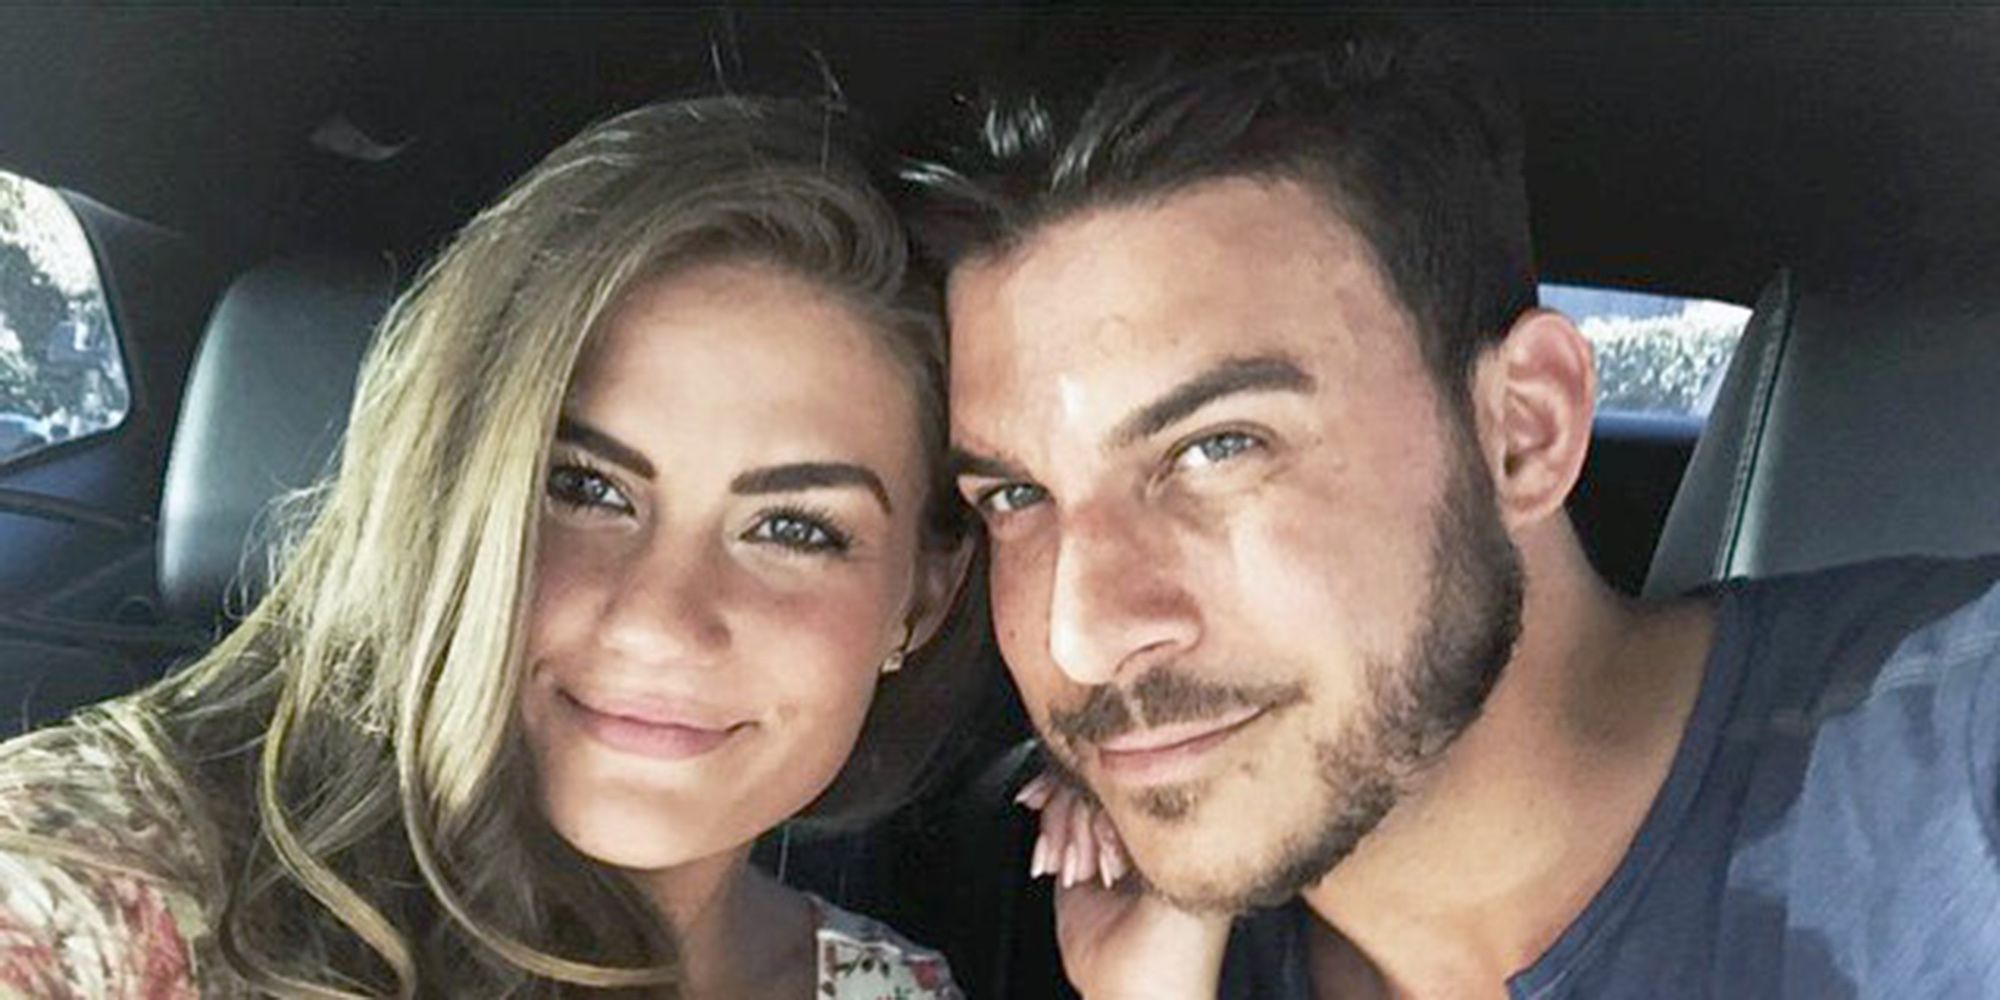 Jax Taylor and Brittany Cartwright from Vanderpump Rules